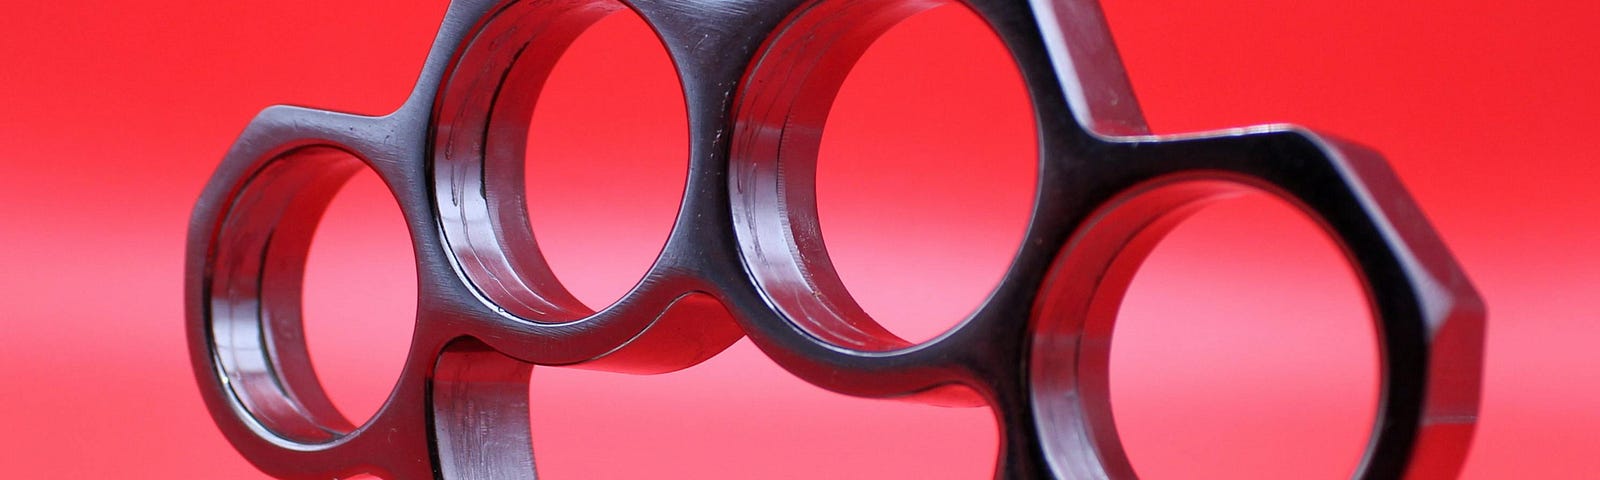 Image shows close-up of shiny, silver set of brass knuckles against a reddish pink background